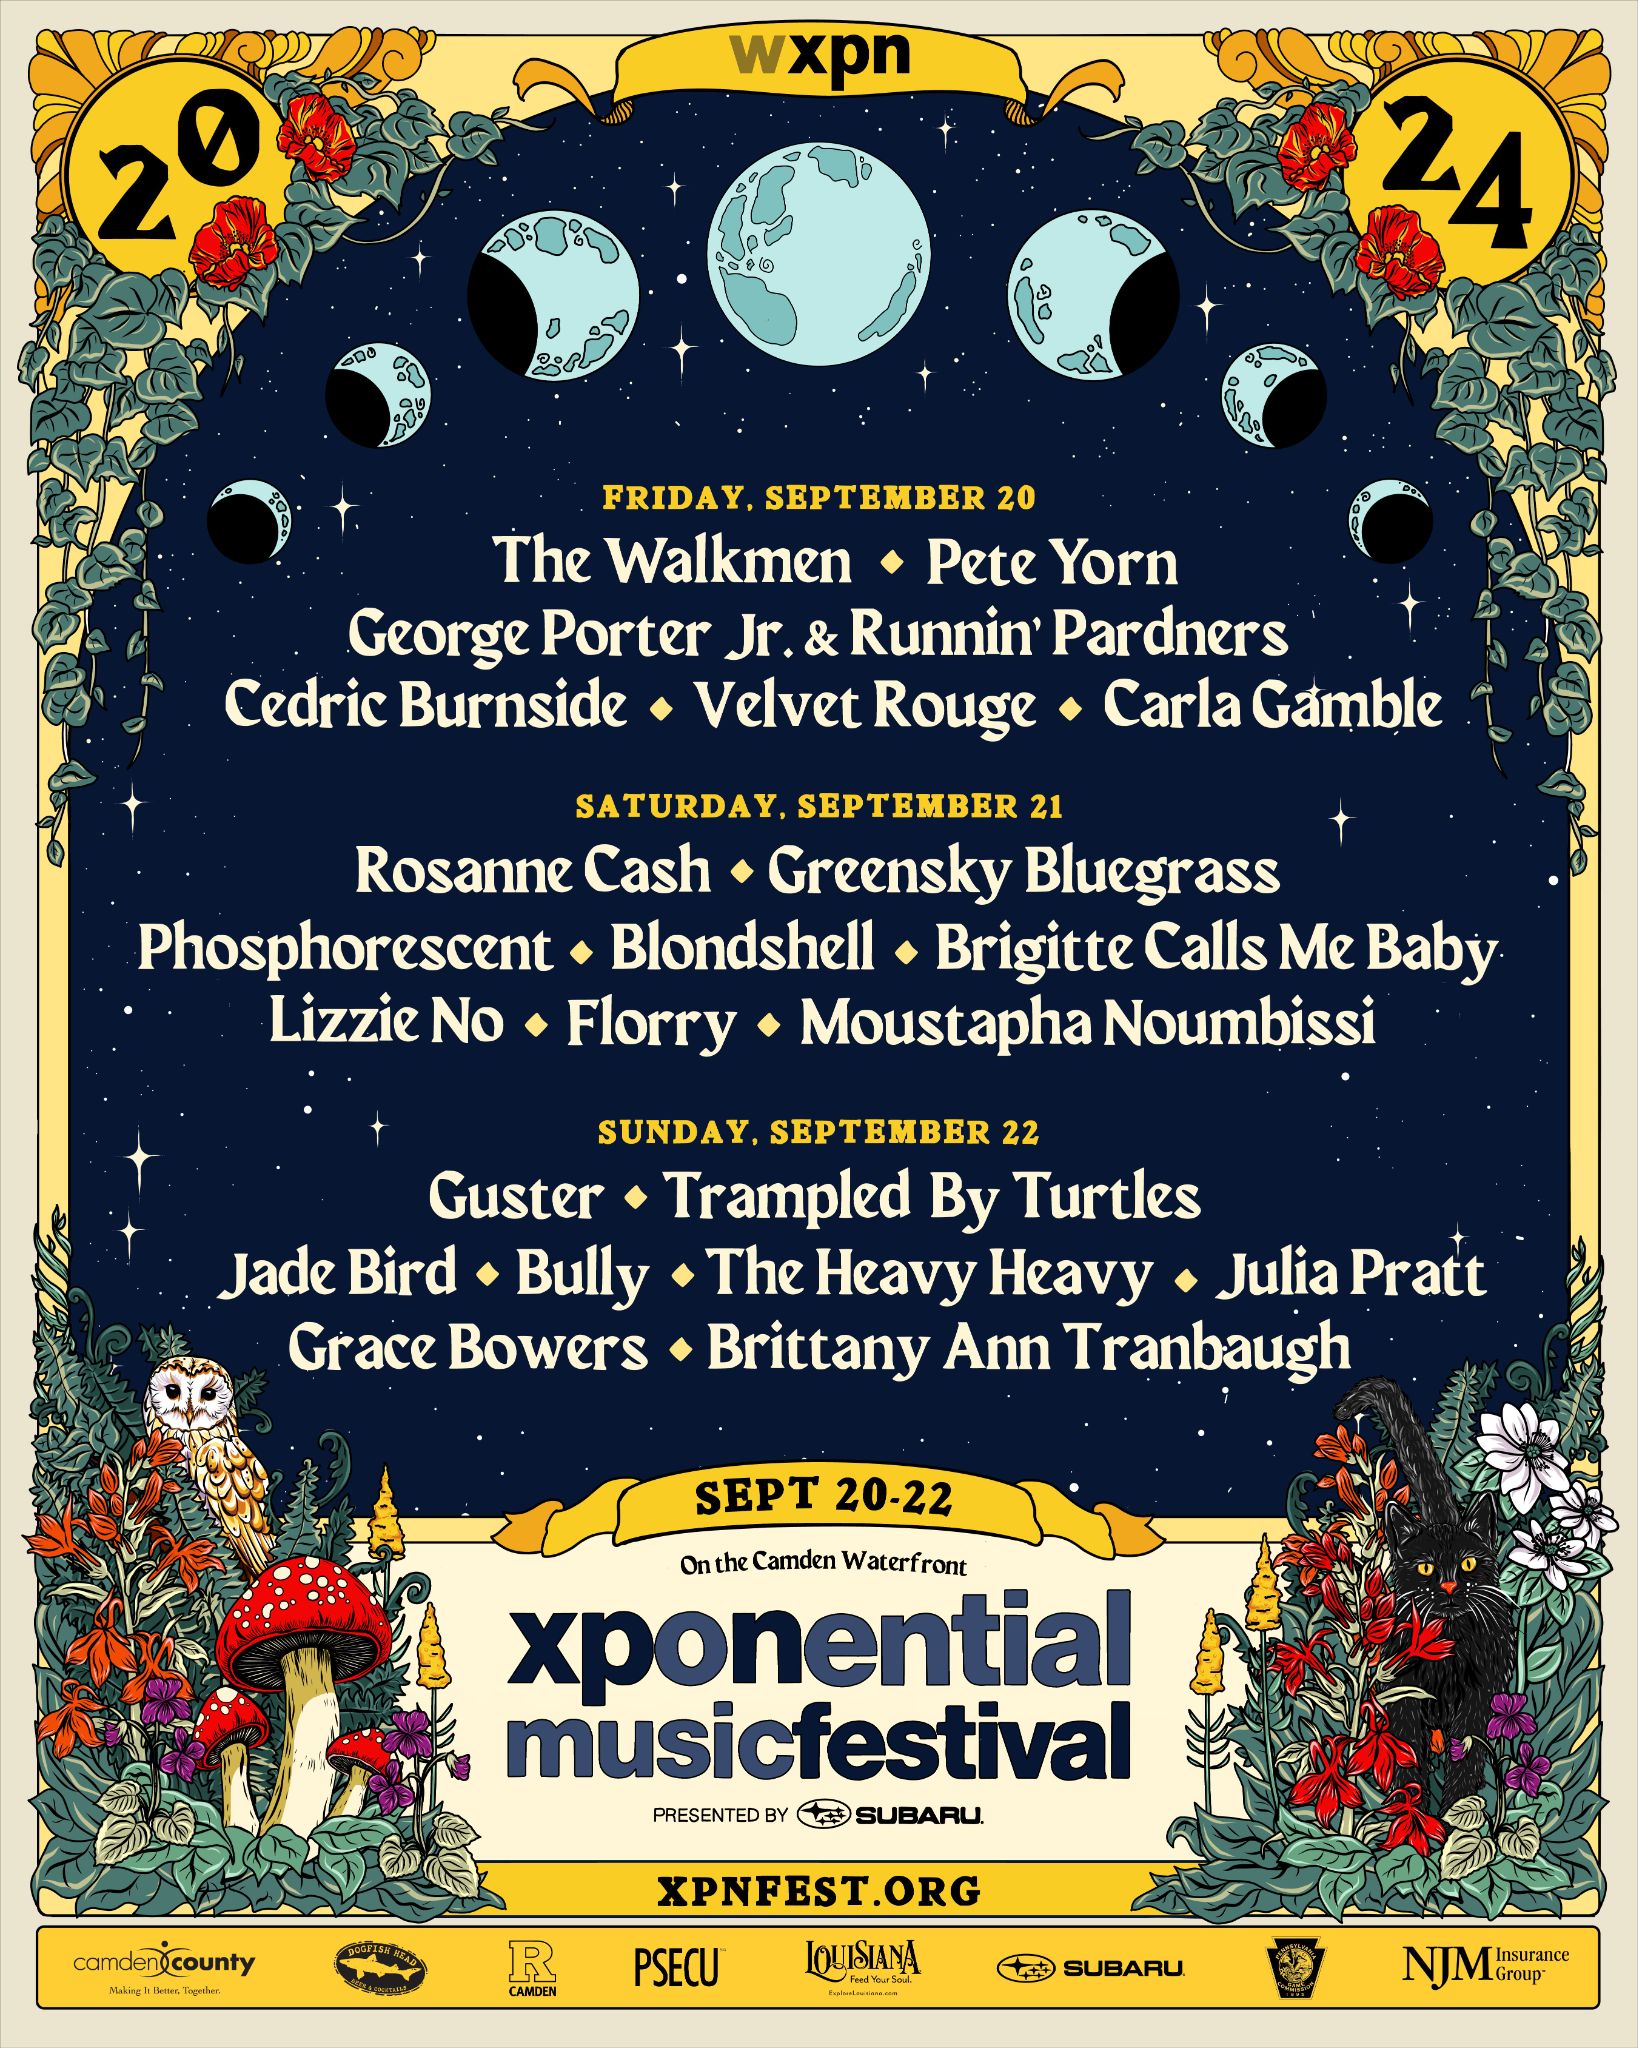 WXPN announces more artists and daily lineups for XPoNential Music Festival, Sept. 20-22 in Camden, NJ